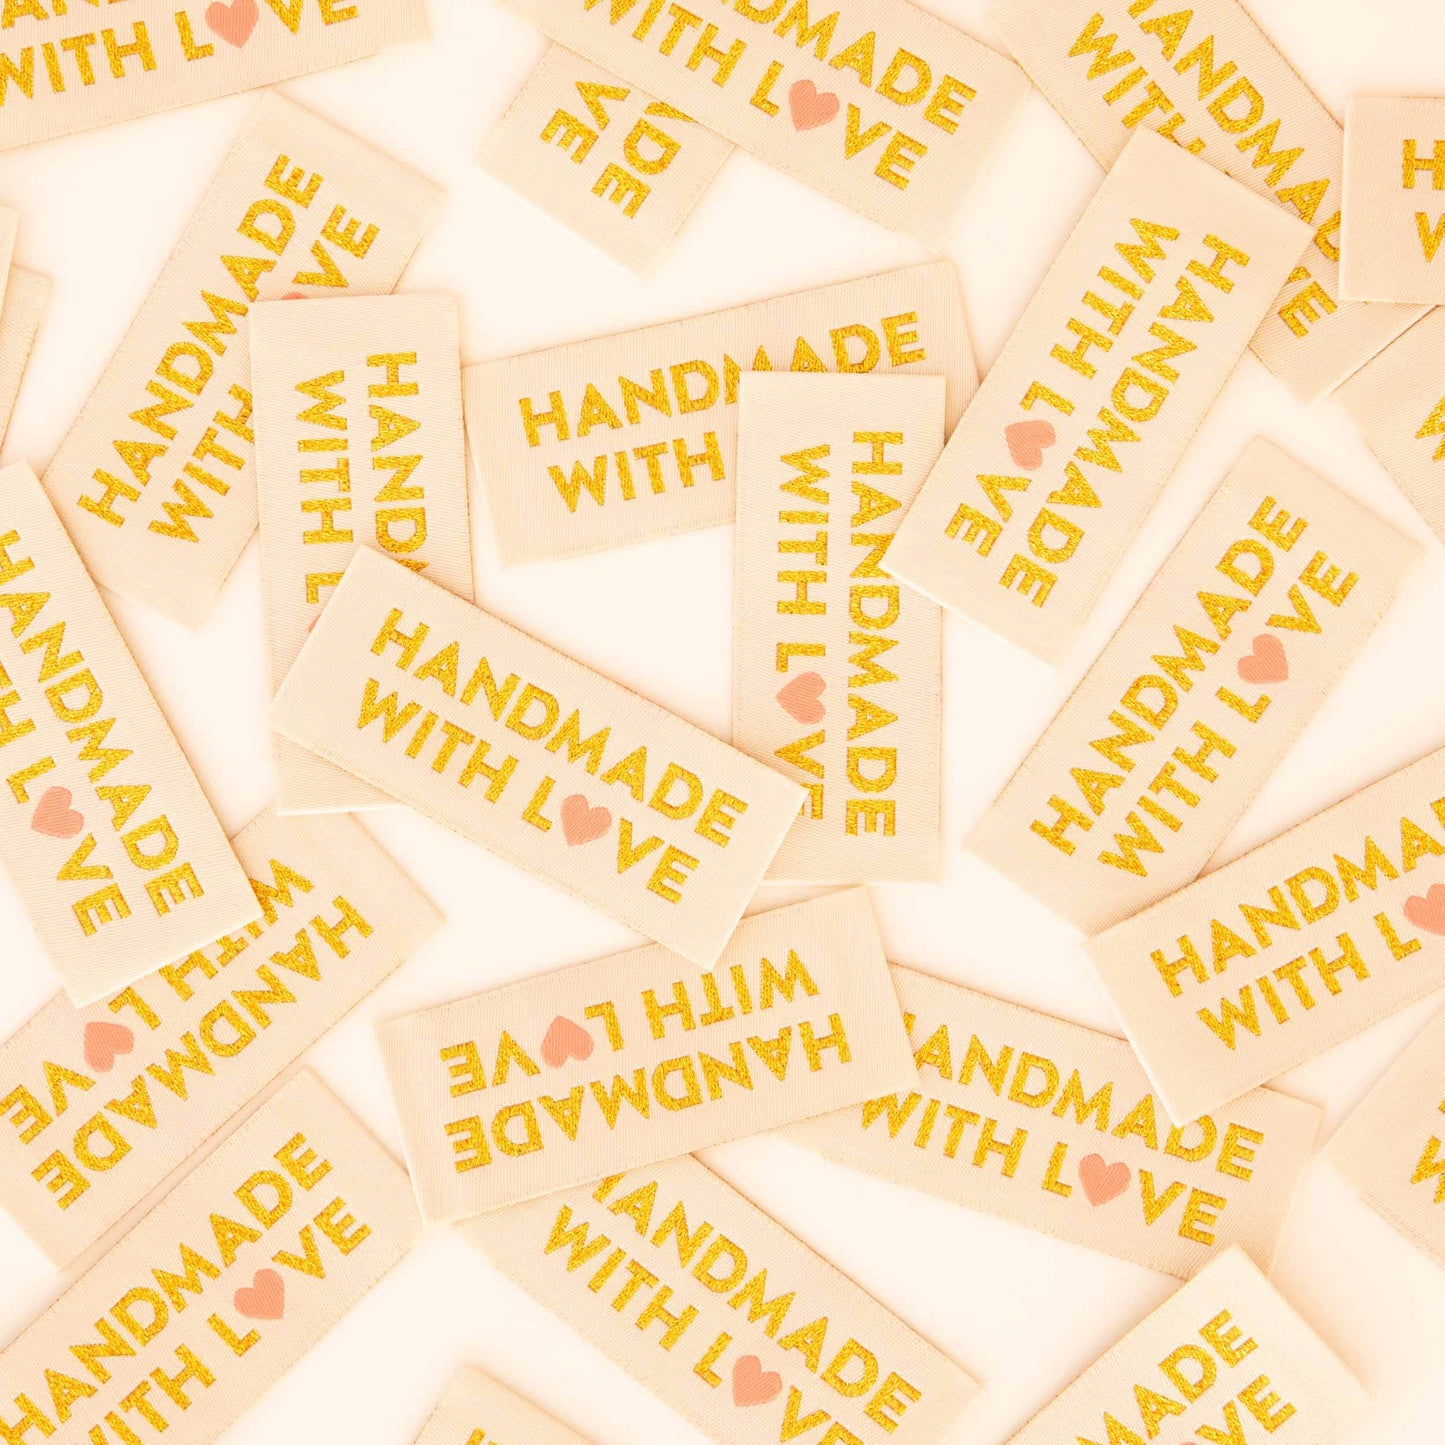 Handmade with Love woven maker labels